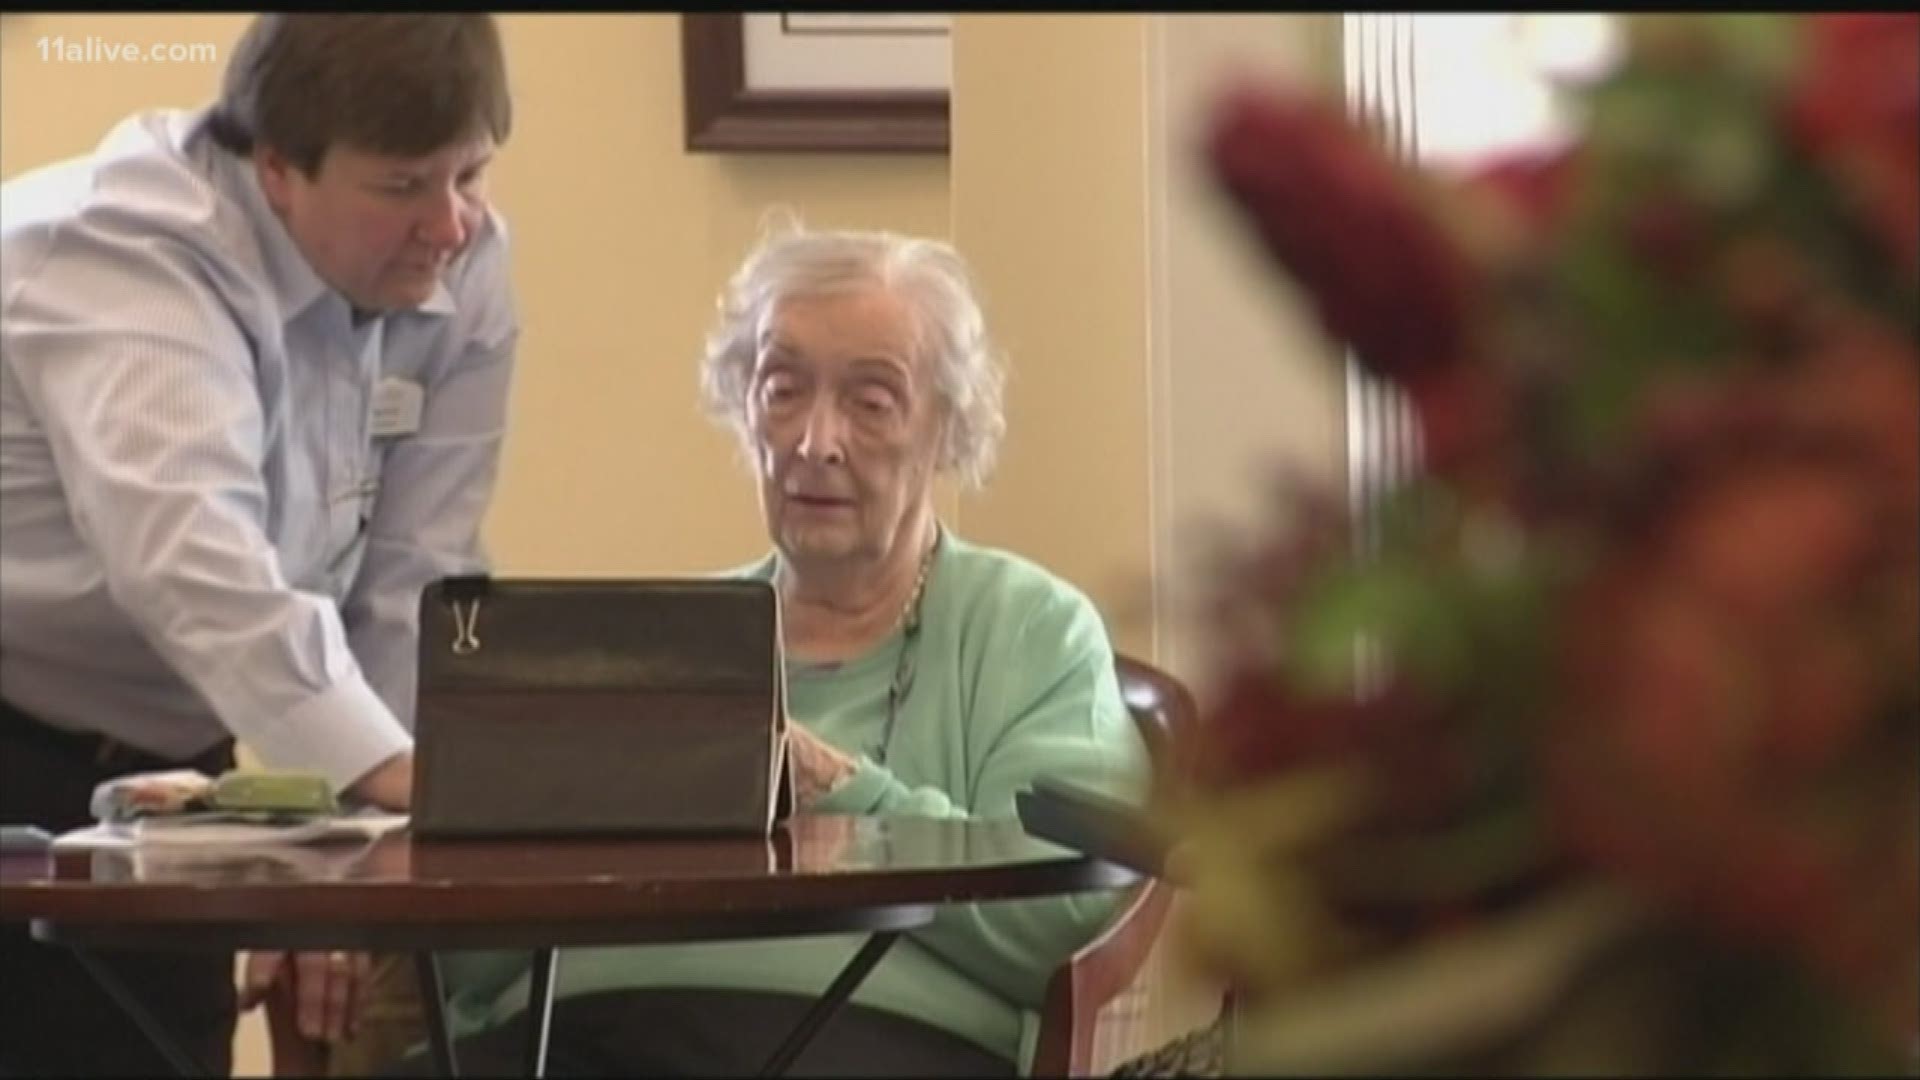 A major deadline for seniors covered by Medicare is approaching.